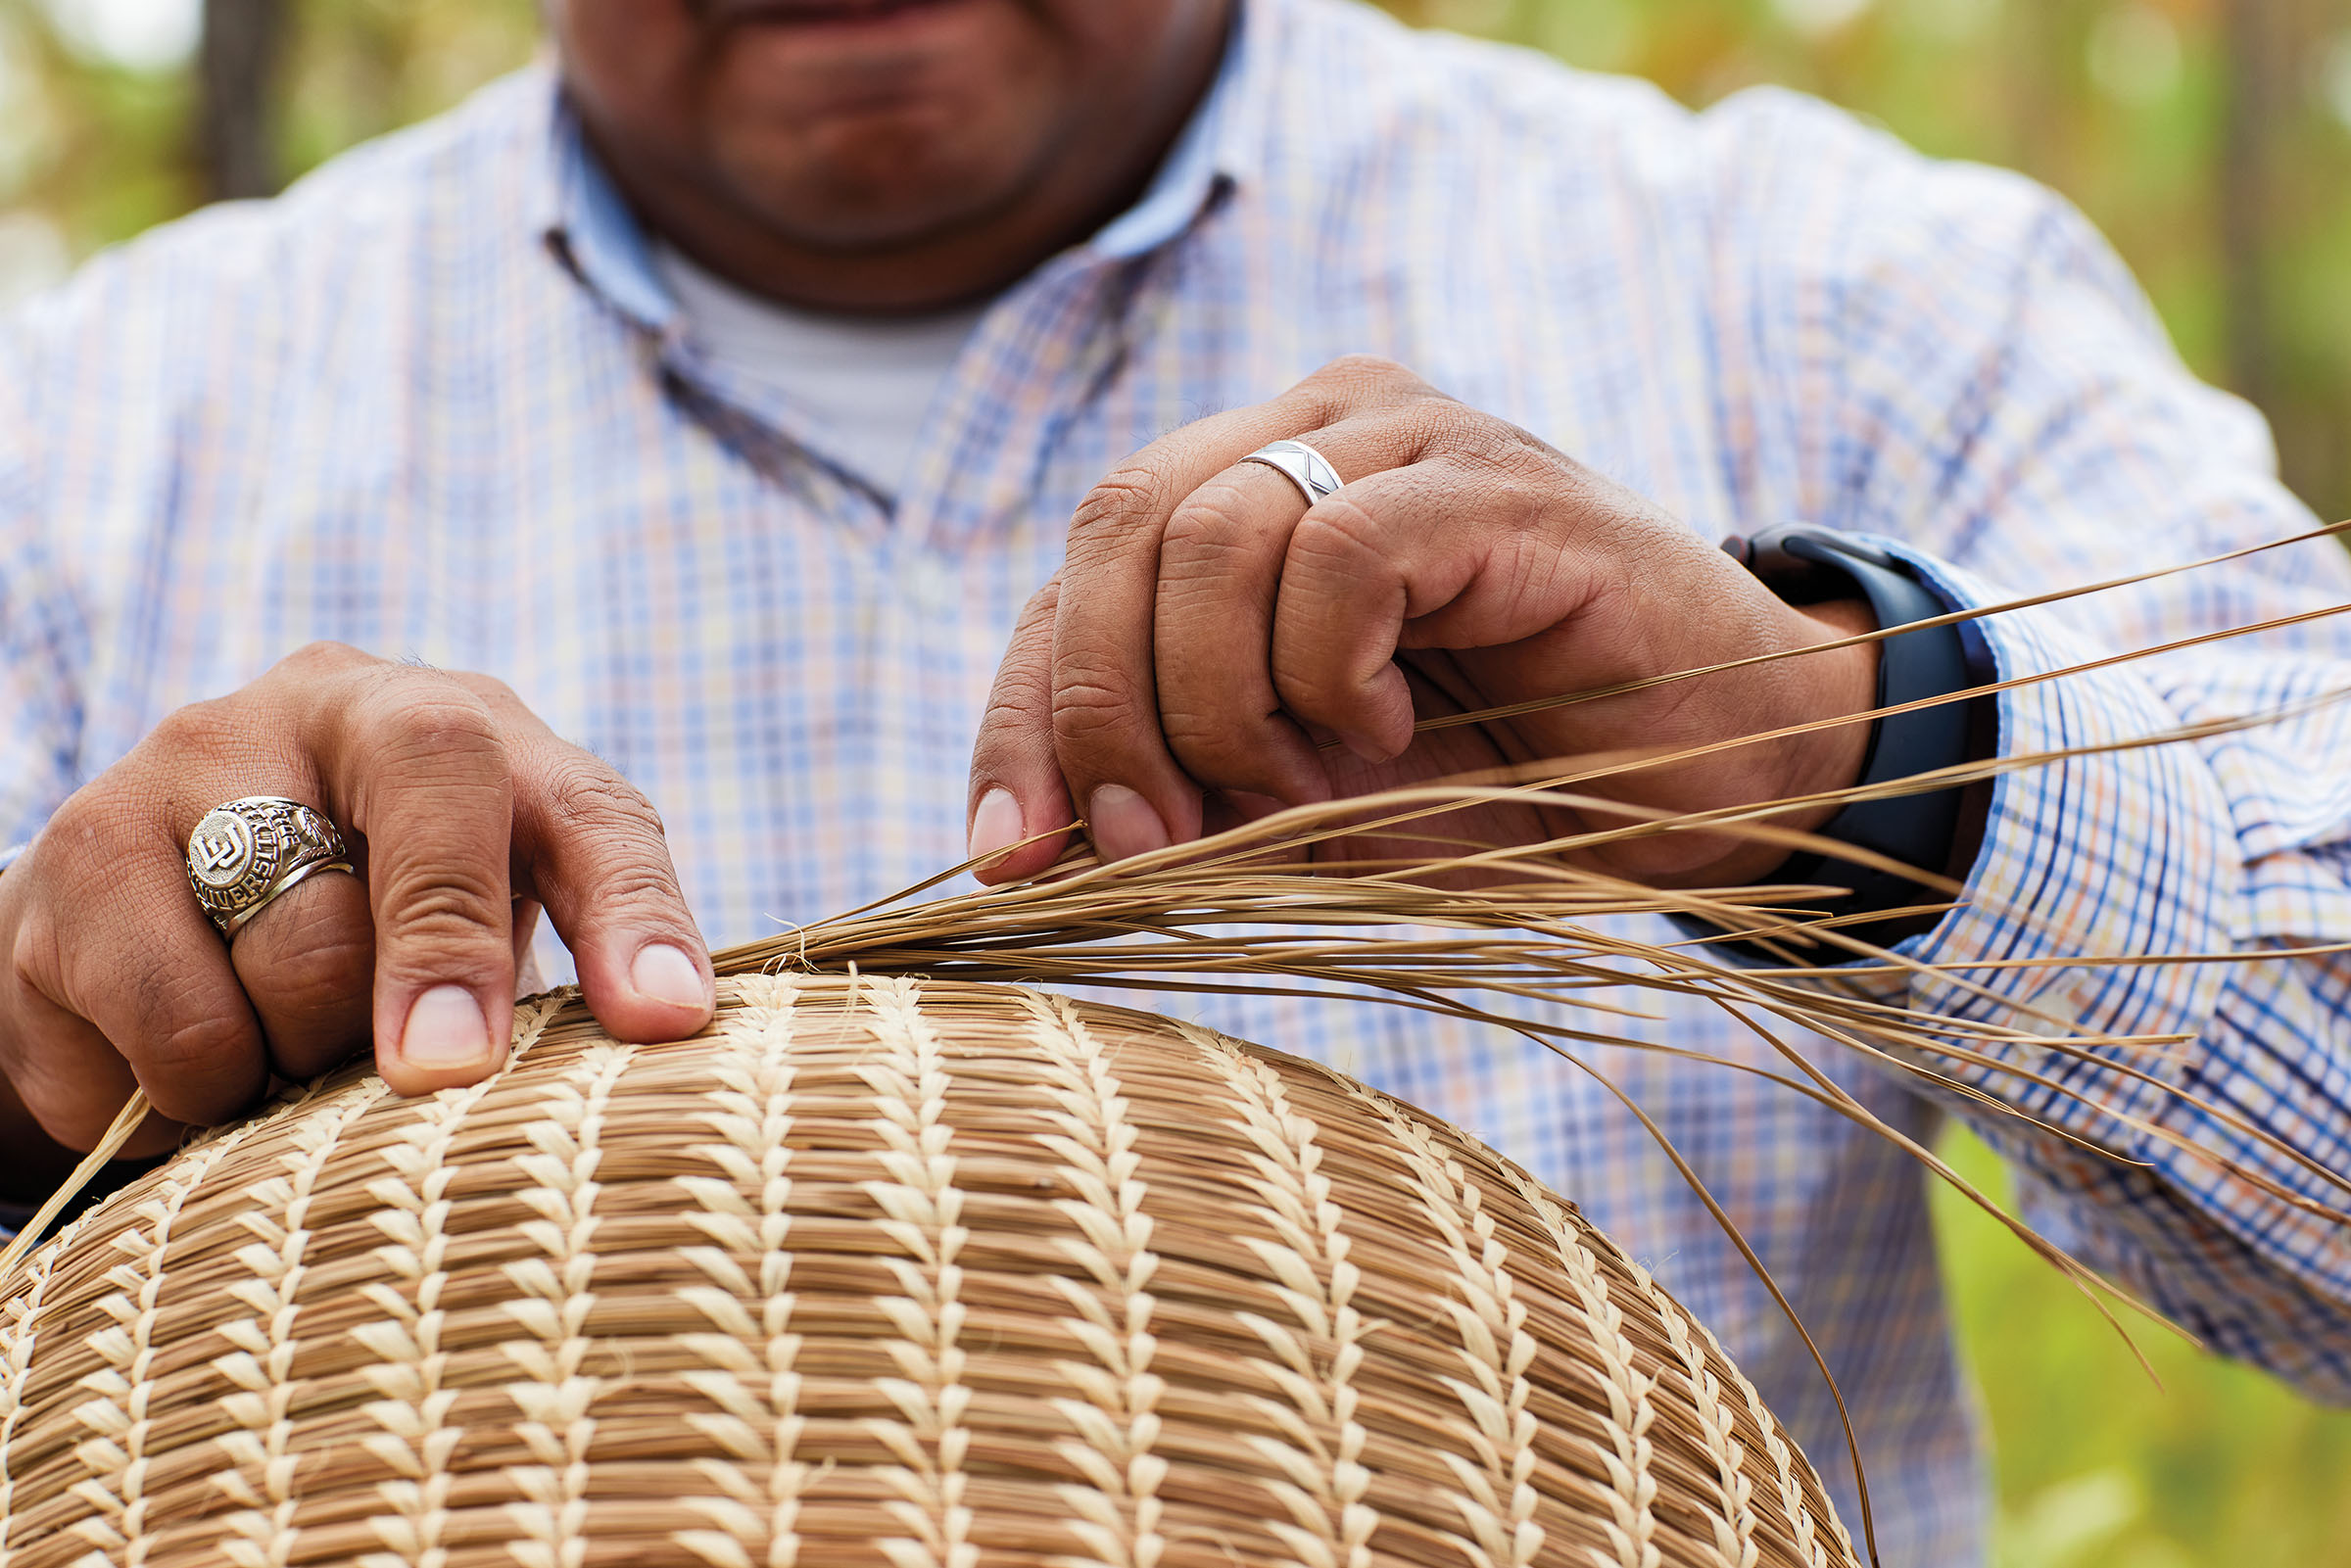 A person's hands carefully weave pieces of tan straw into the shape of a basket